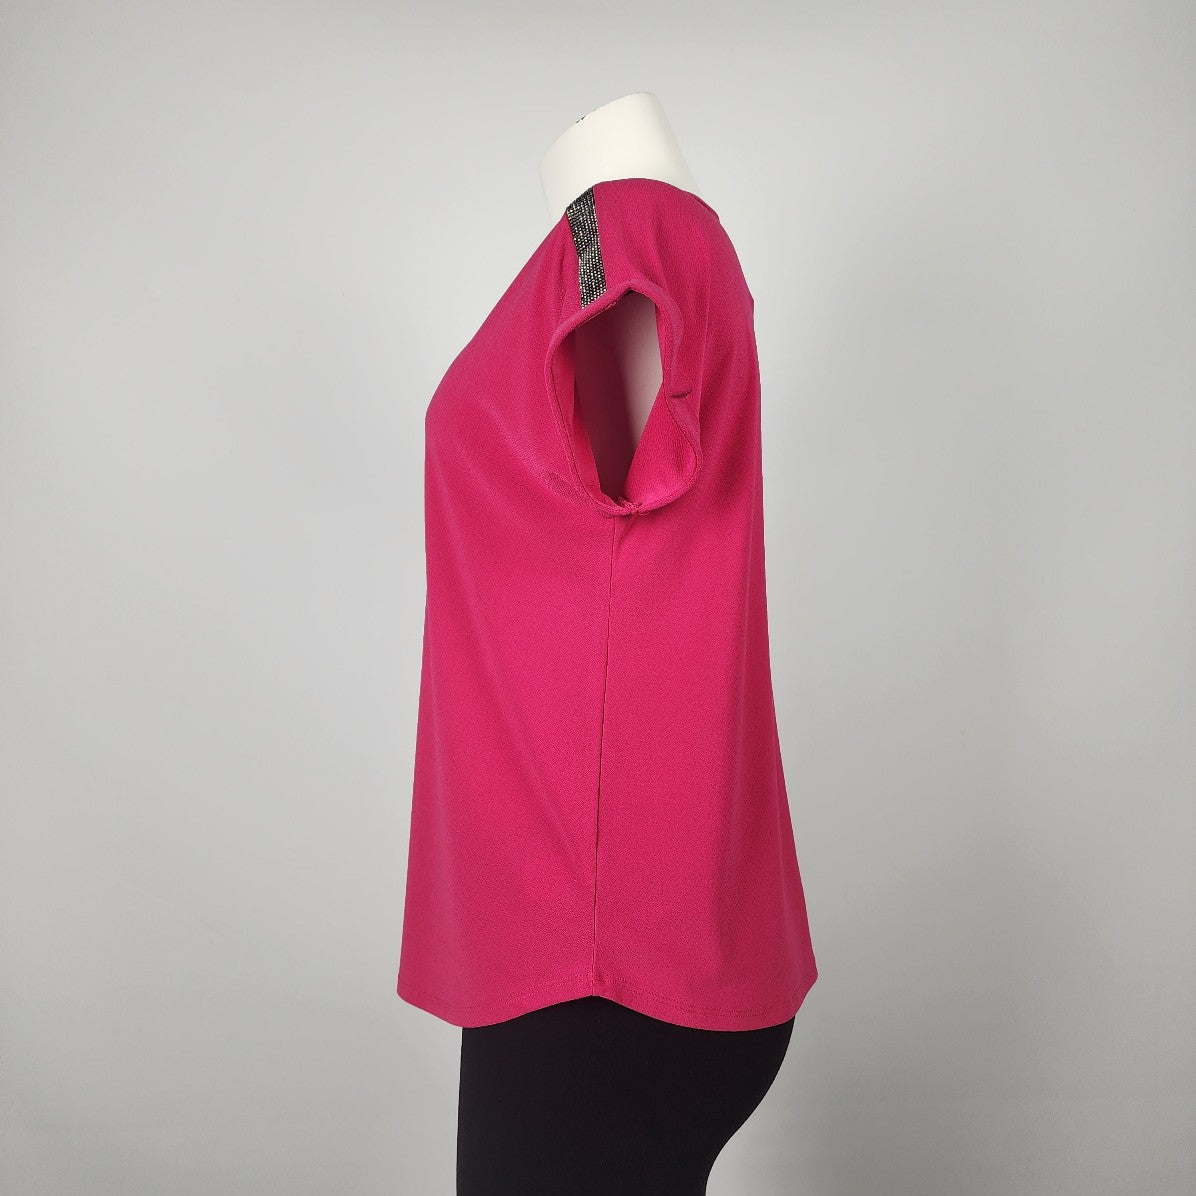 89th Madison Hot Pink Studded Sleeve Detail Top Size M